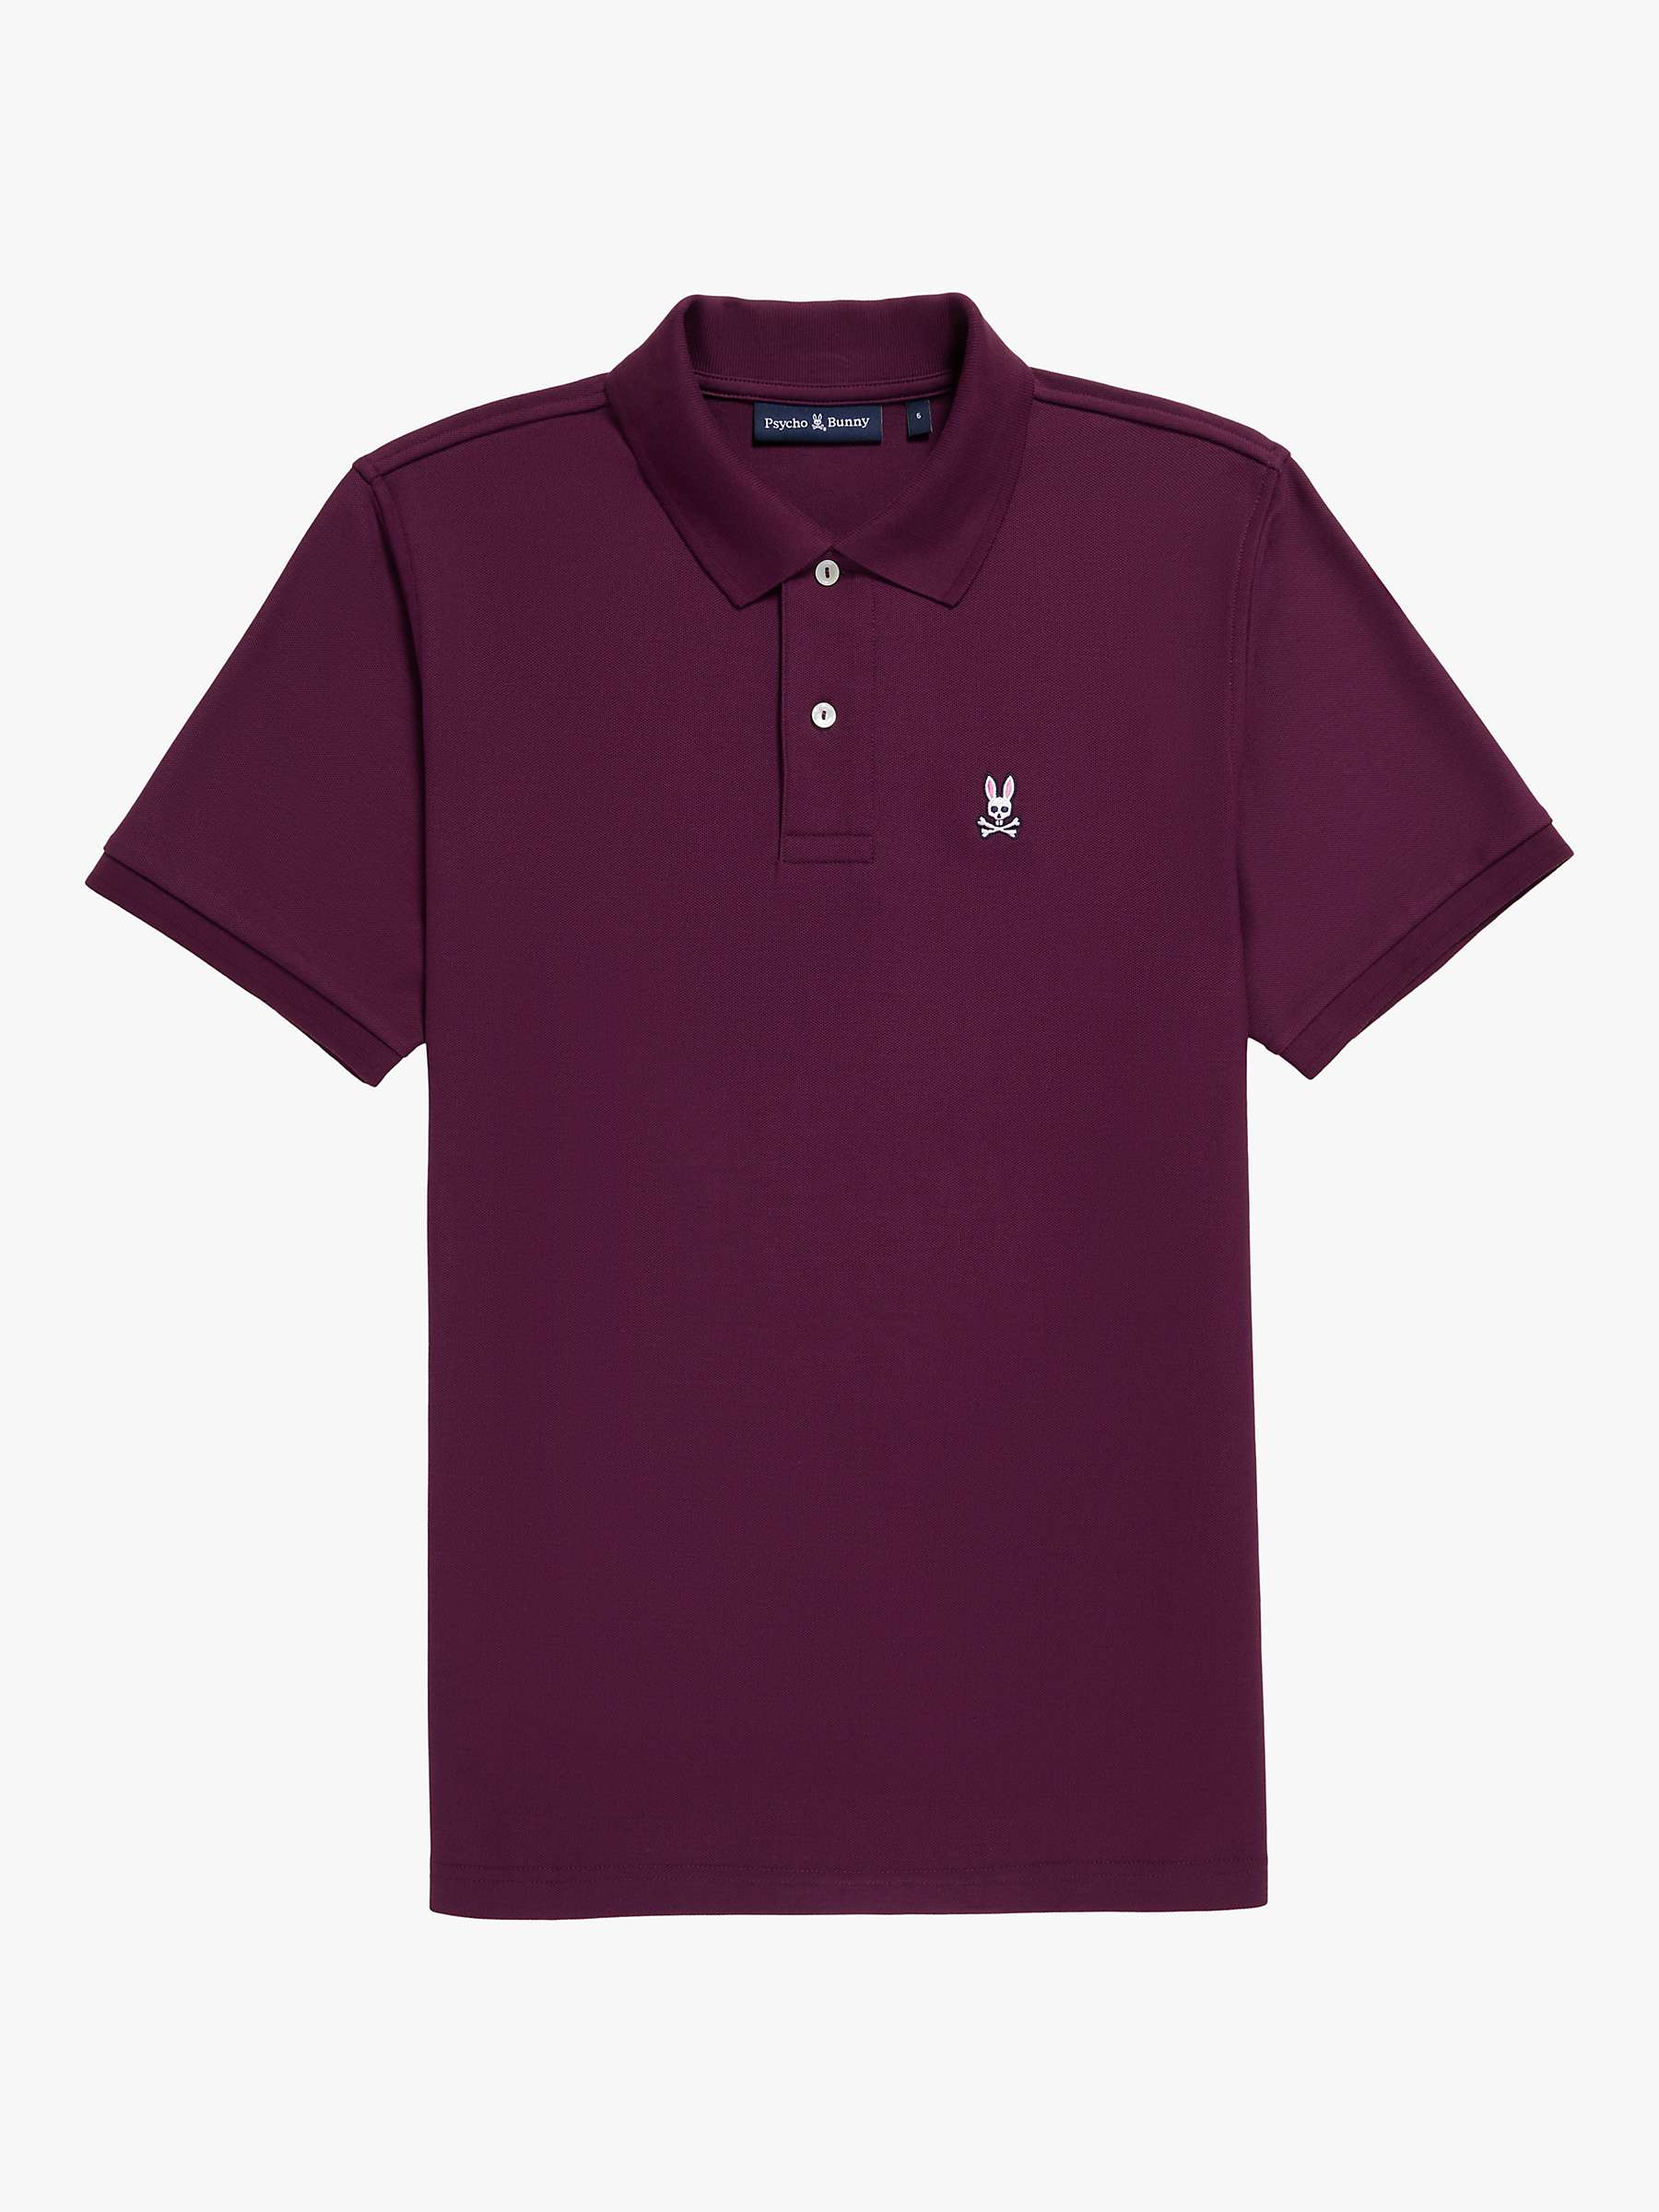 Buy Psycho Bunny Classic Pique Polo Shirt Online at johnlewis.com